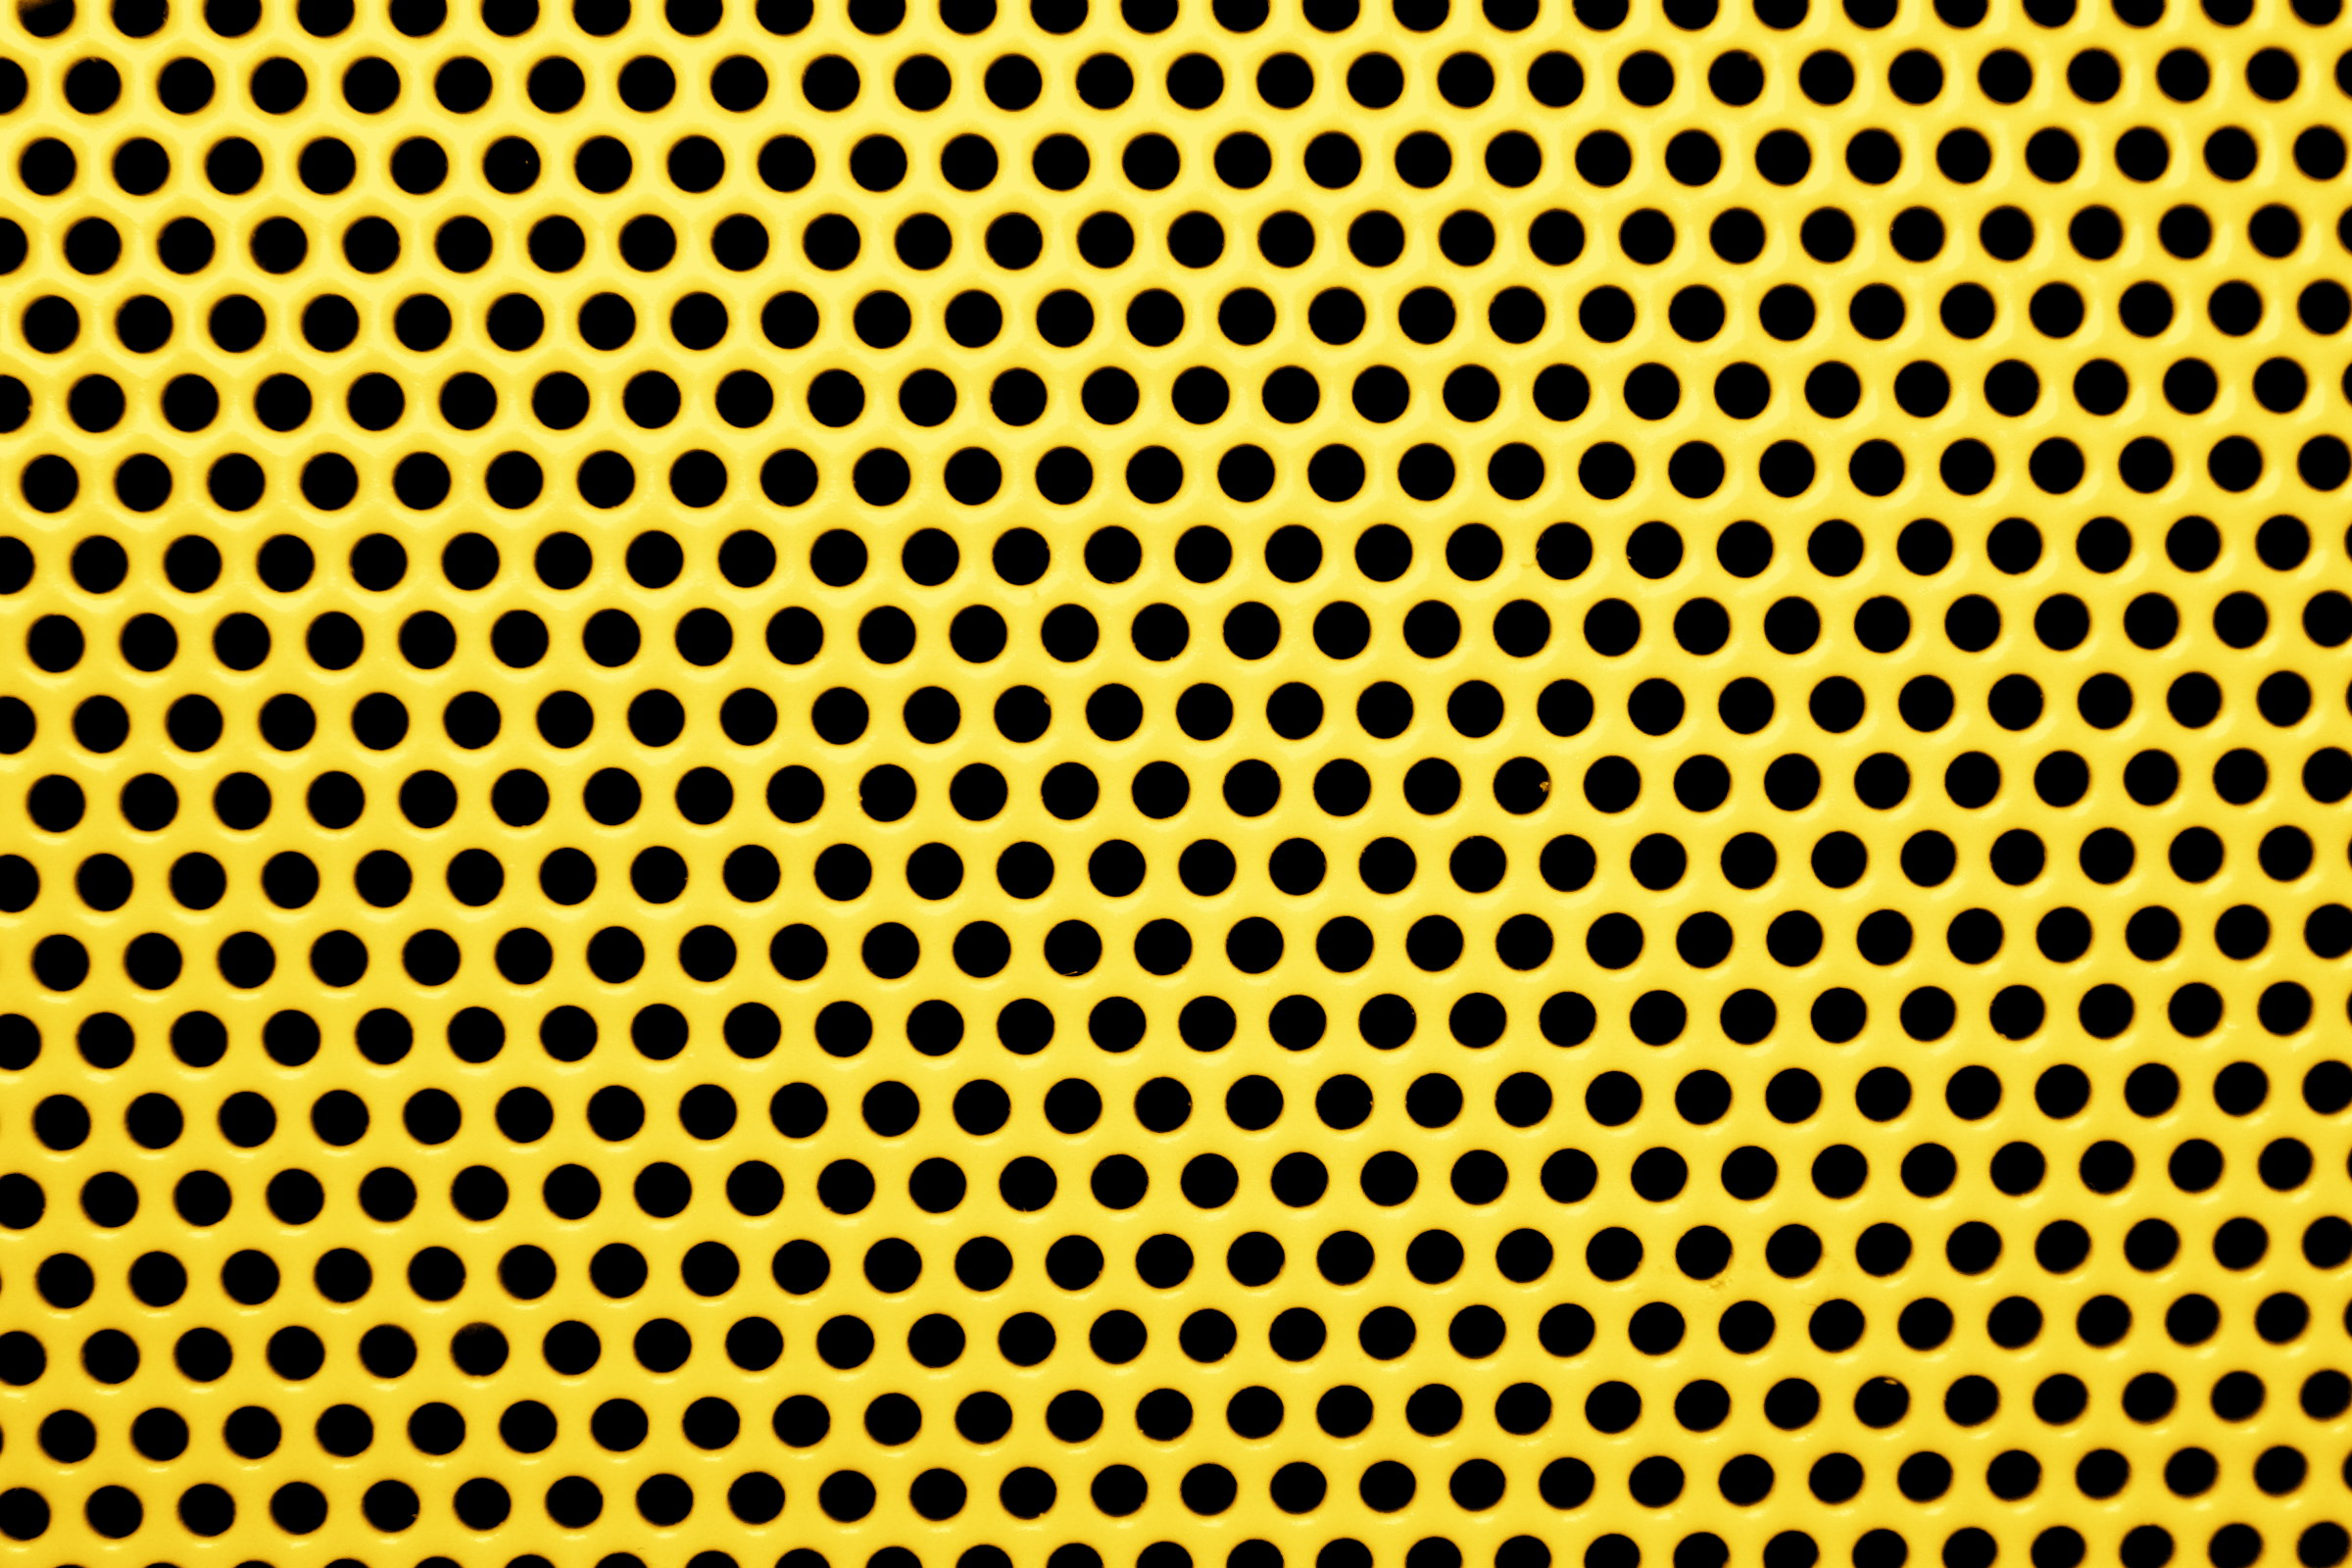 skelet Cilia brandwond Yellow Metal Mesh with Round Holes Texture Picture | Free Photograph |  Photos Public Domain